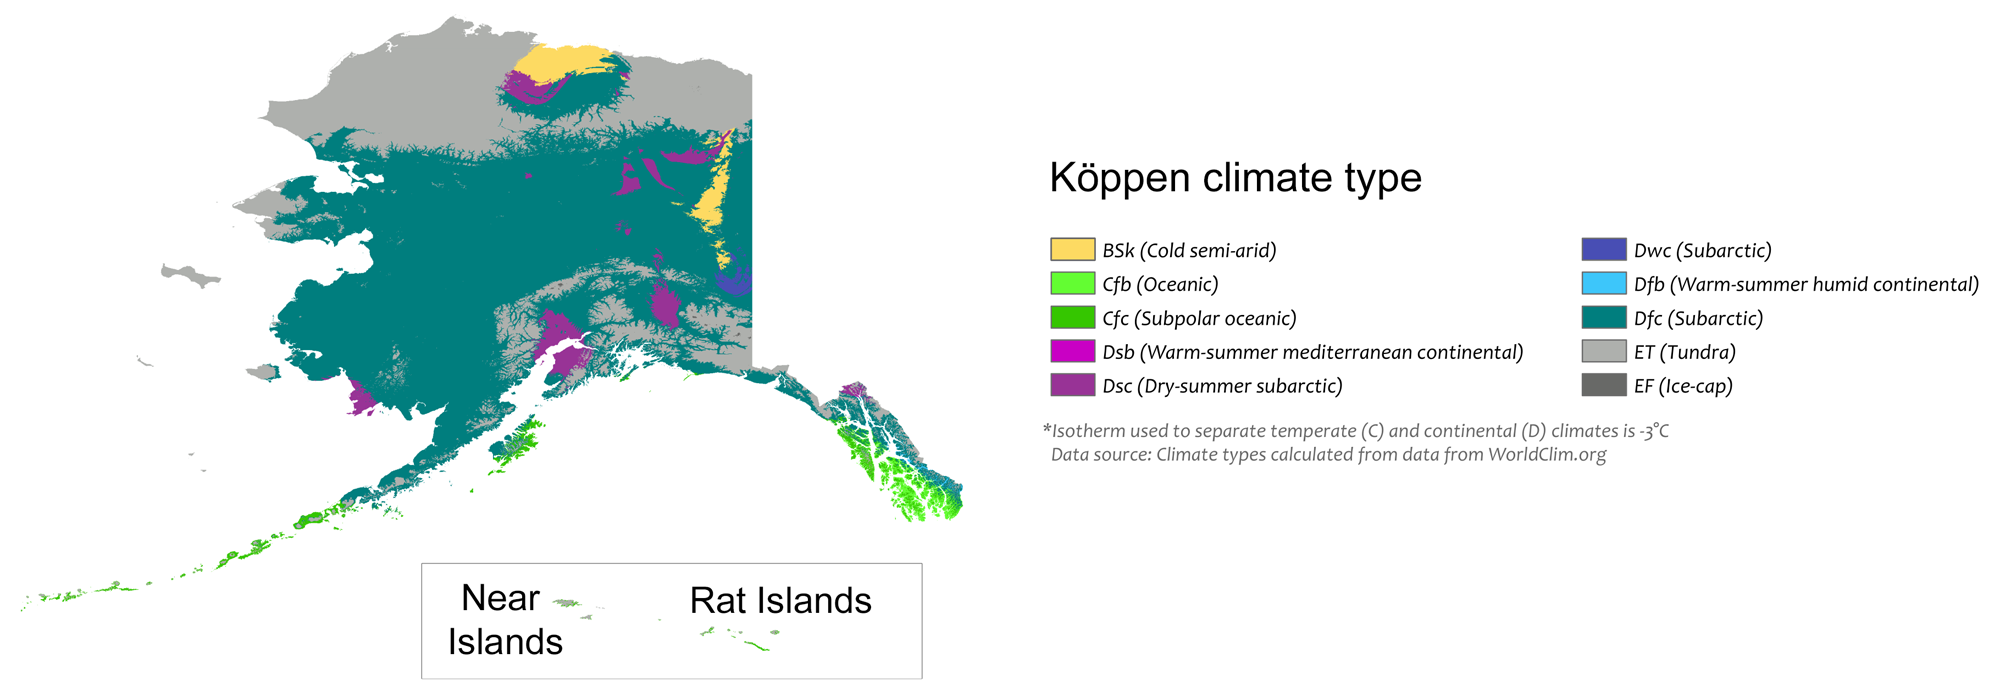 Koppen climate map of Alaska showing climate zones.